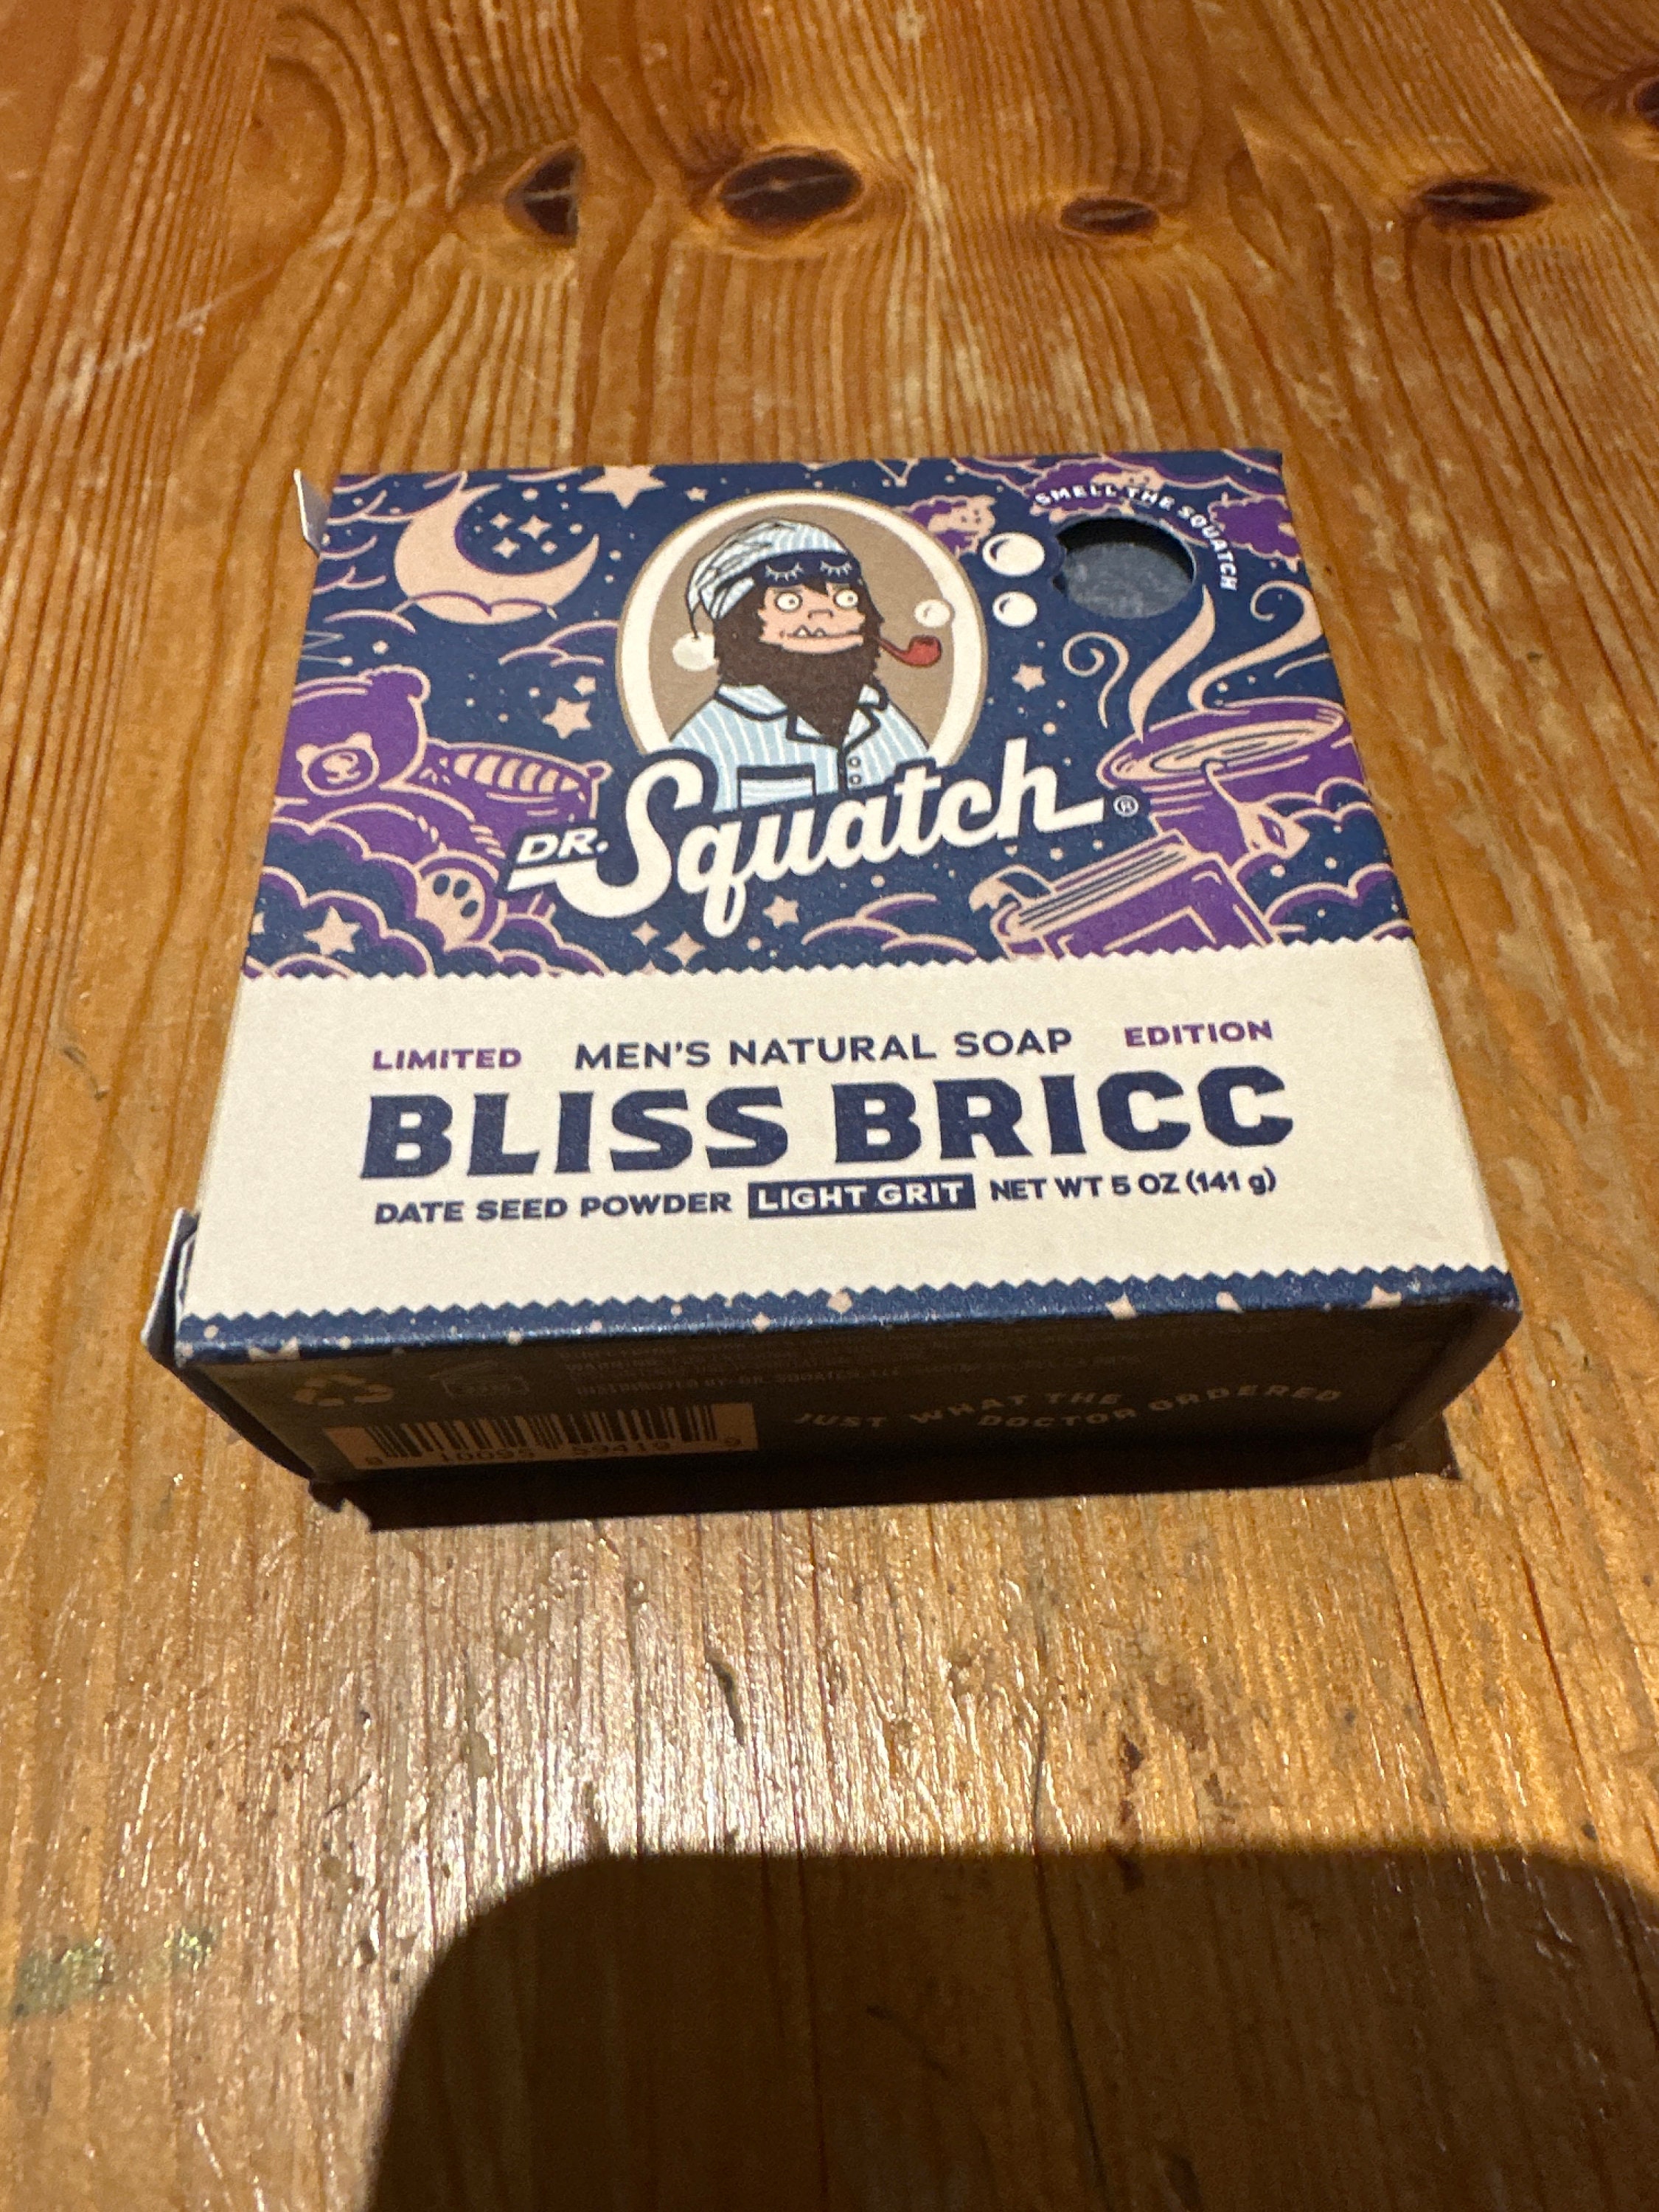 Dr. Squatch Soaps LIMITED EDITON Bars & SAMPLES DS203 